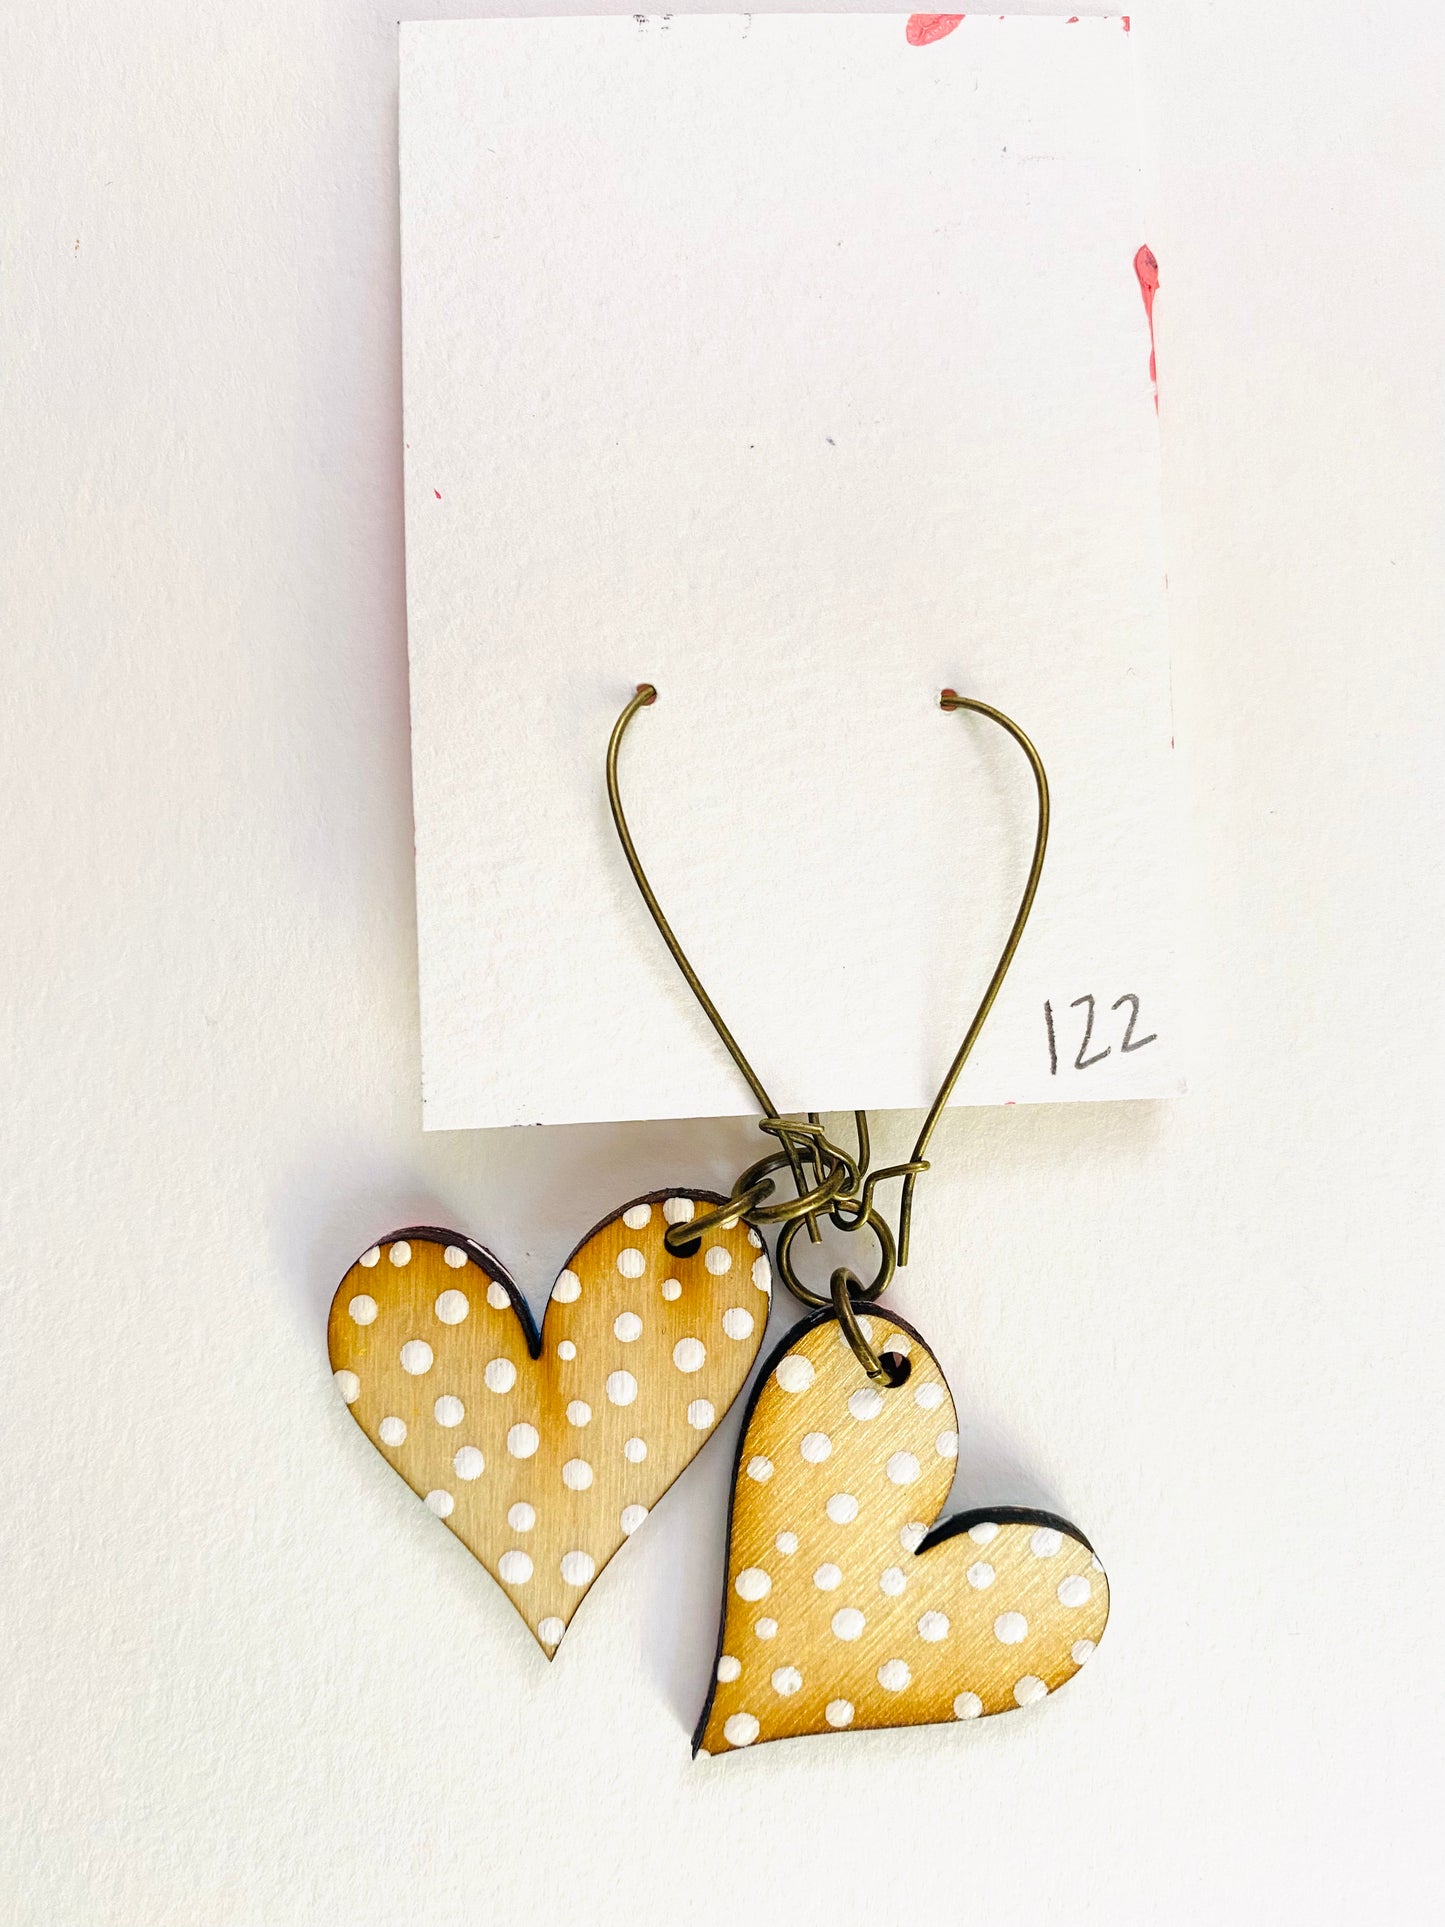 Colorful, Hand Painted, Heart Shaped Earrings 122